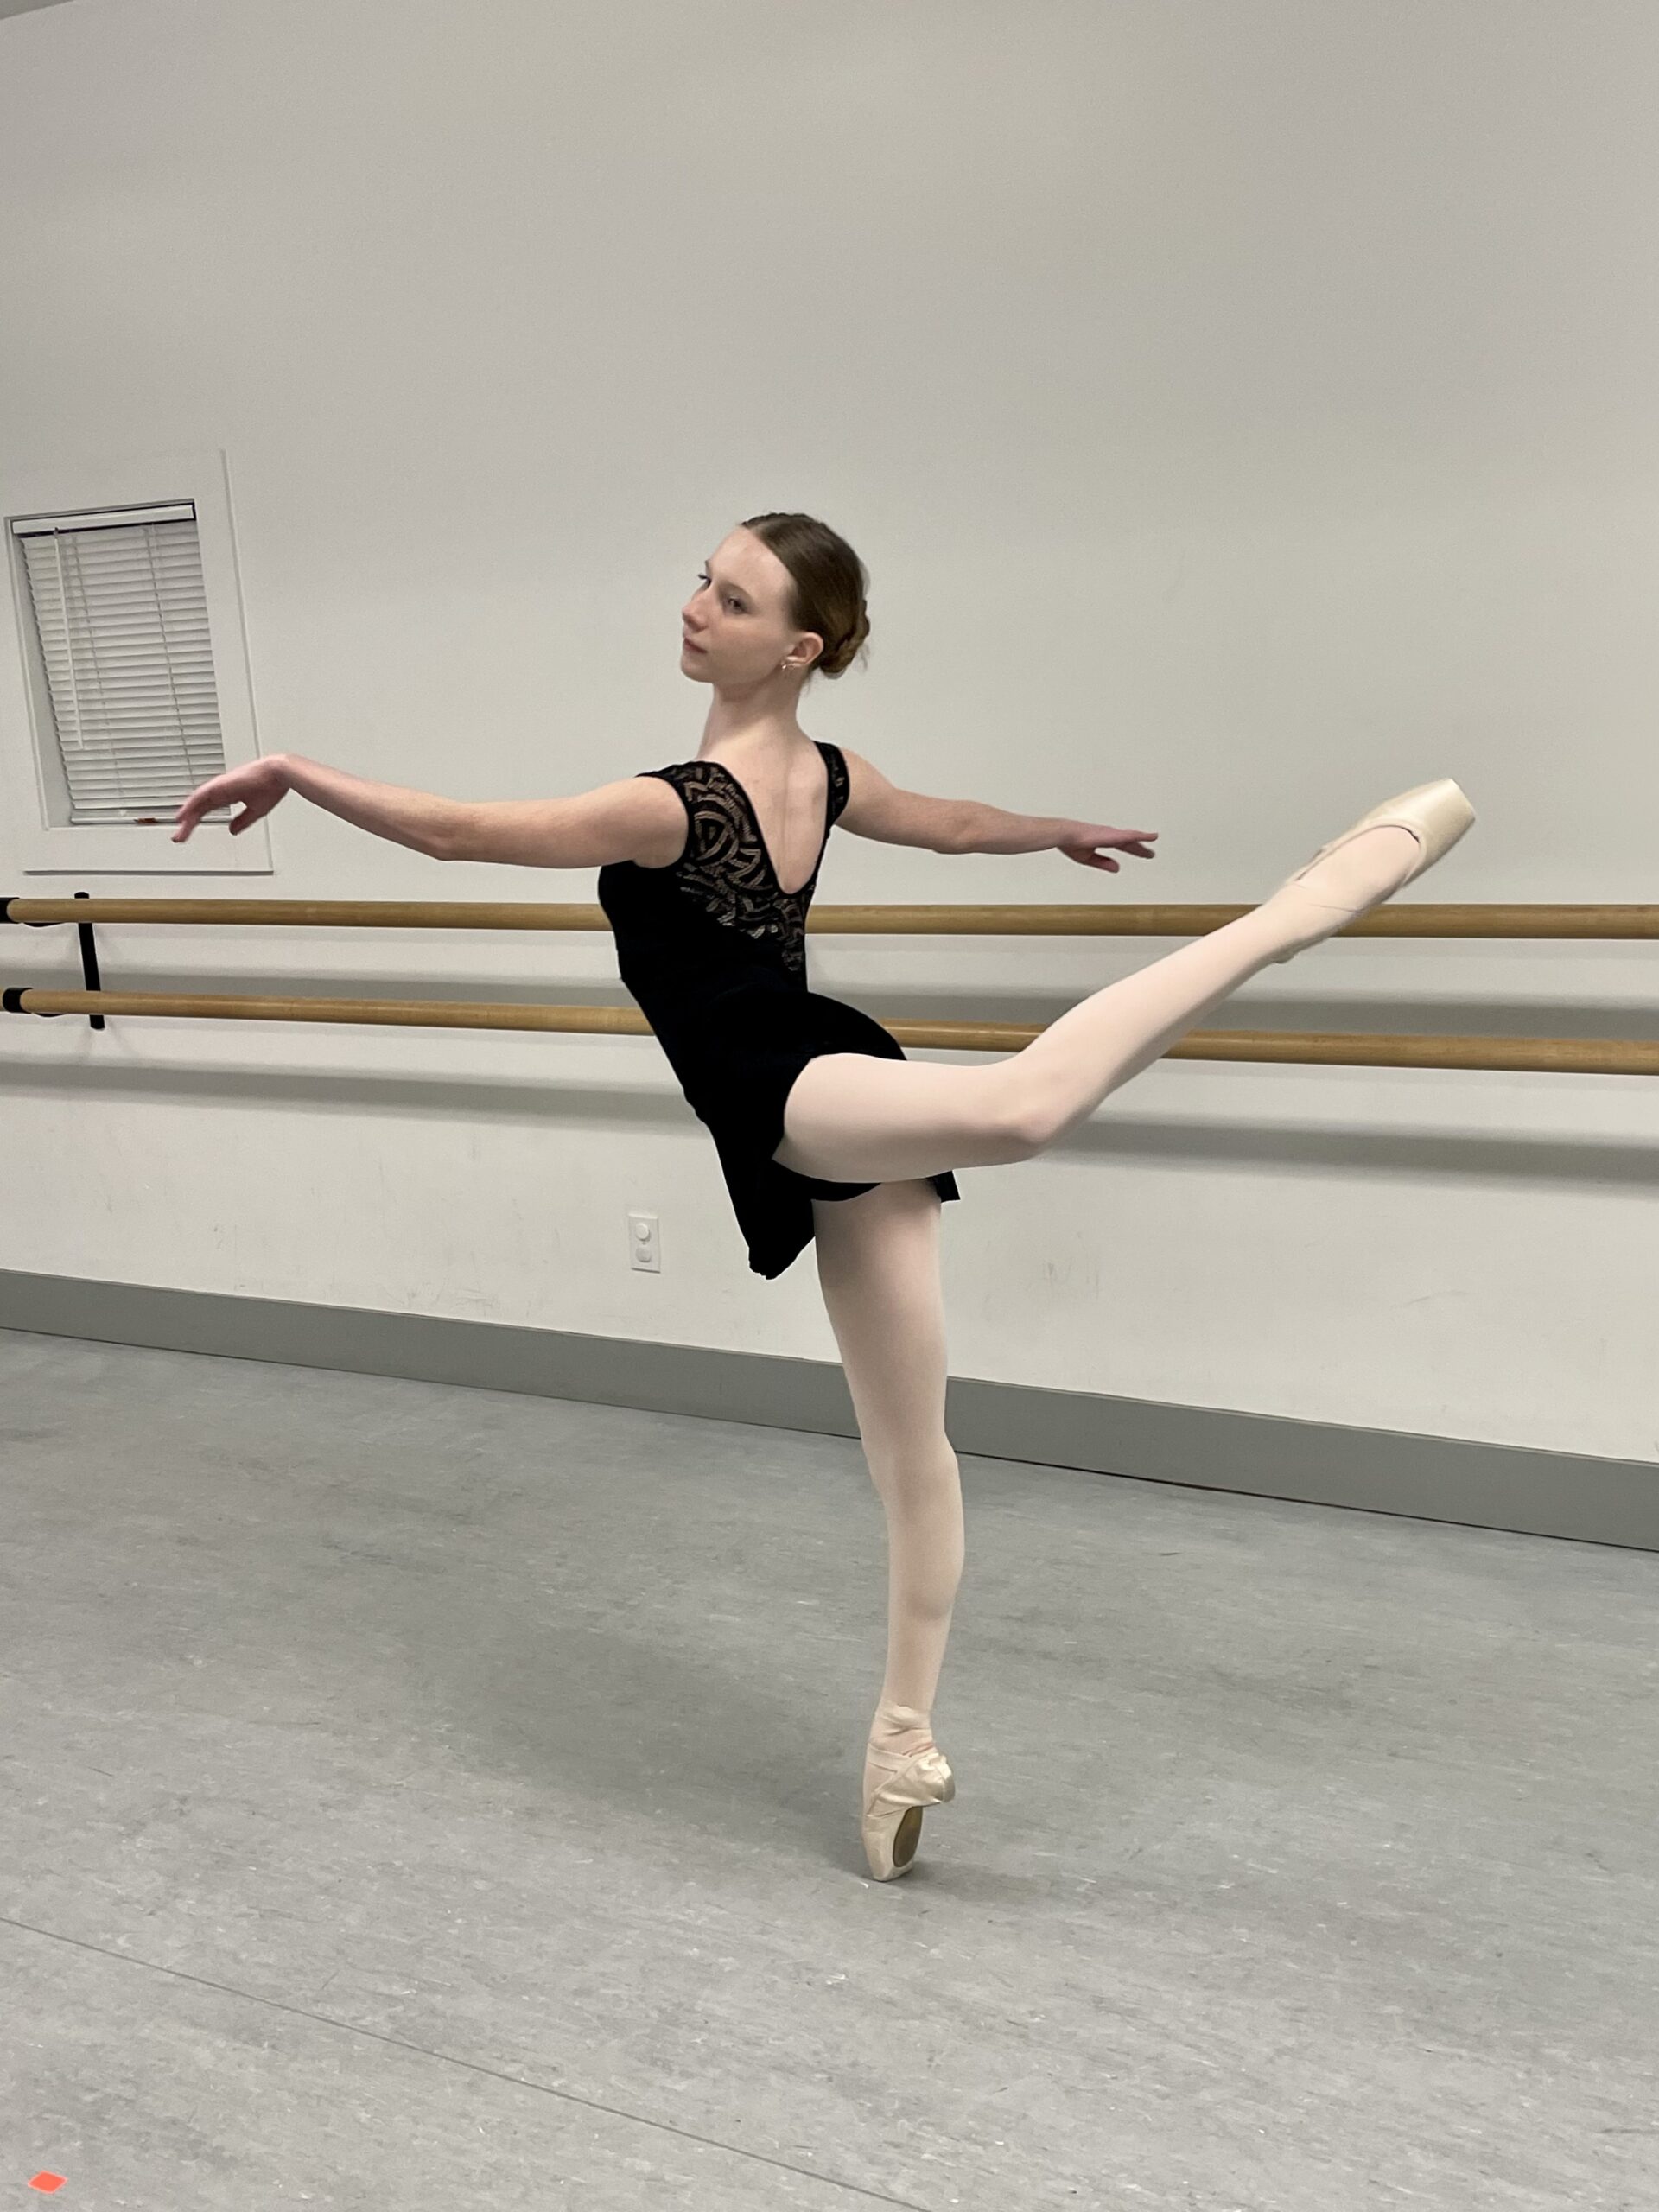 East Hampton High School junior Maya Leathers will share the role of the Sugar Plum Fairy with two fellow ballerinas in Studio 3's production of the Nutcracker this holiday season. JENNIFER VAN ARSDALE